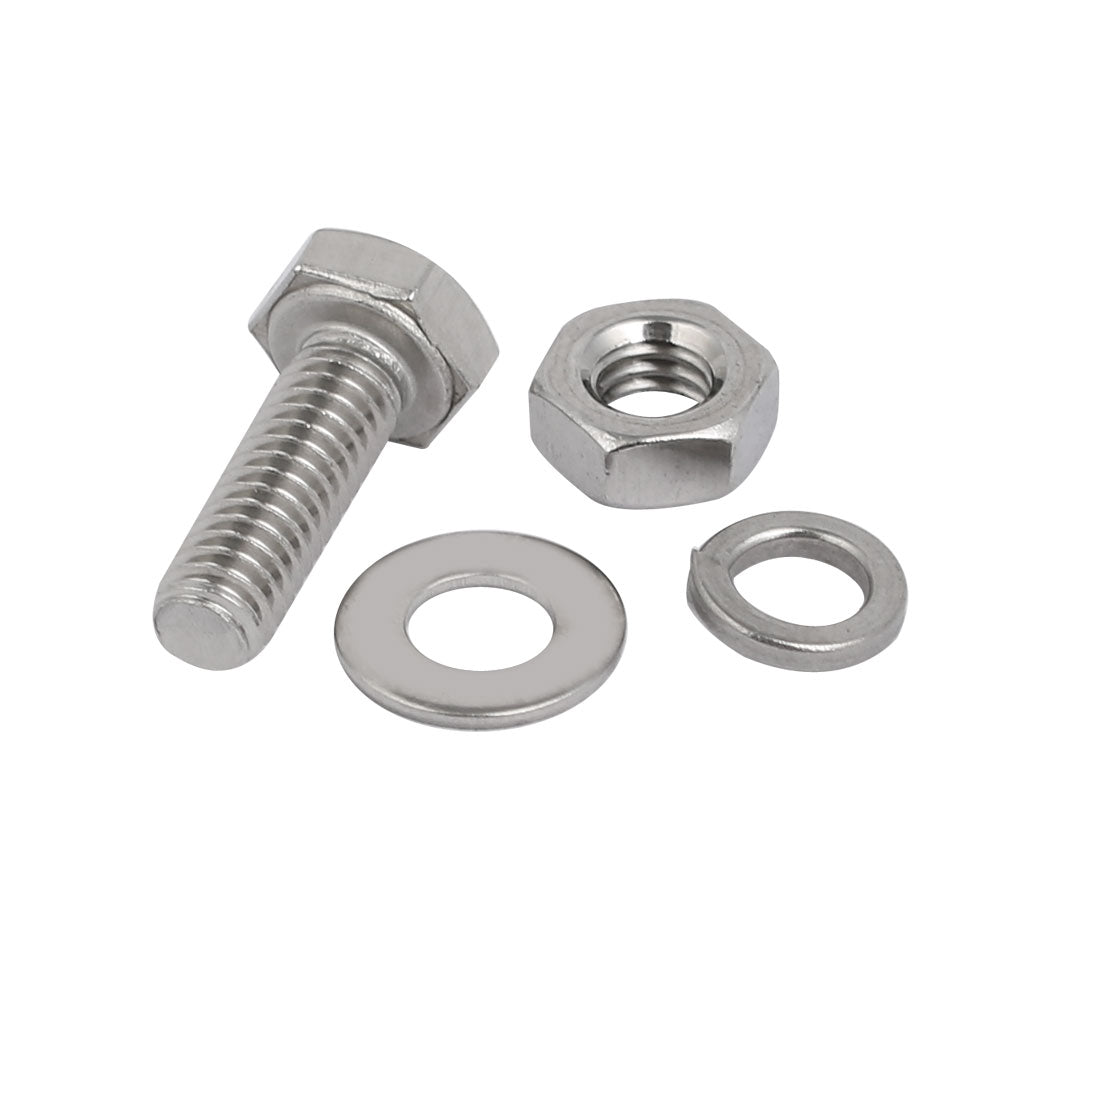 uxcell Uxcell 20pcs 304 Stainless Steel M4x12mm Hex Bolts w Nuts and Washers Assortment Kit